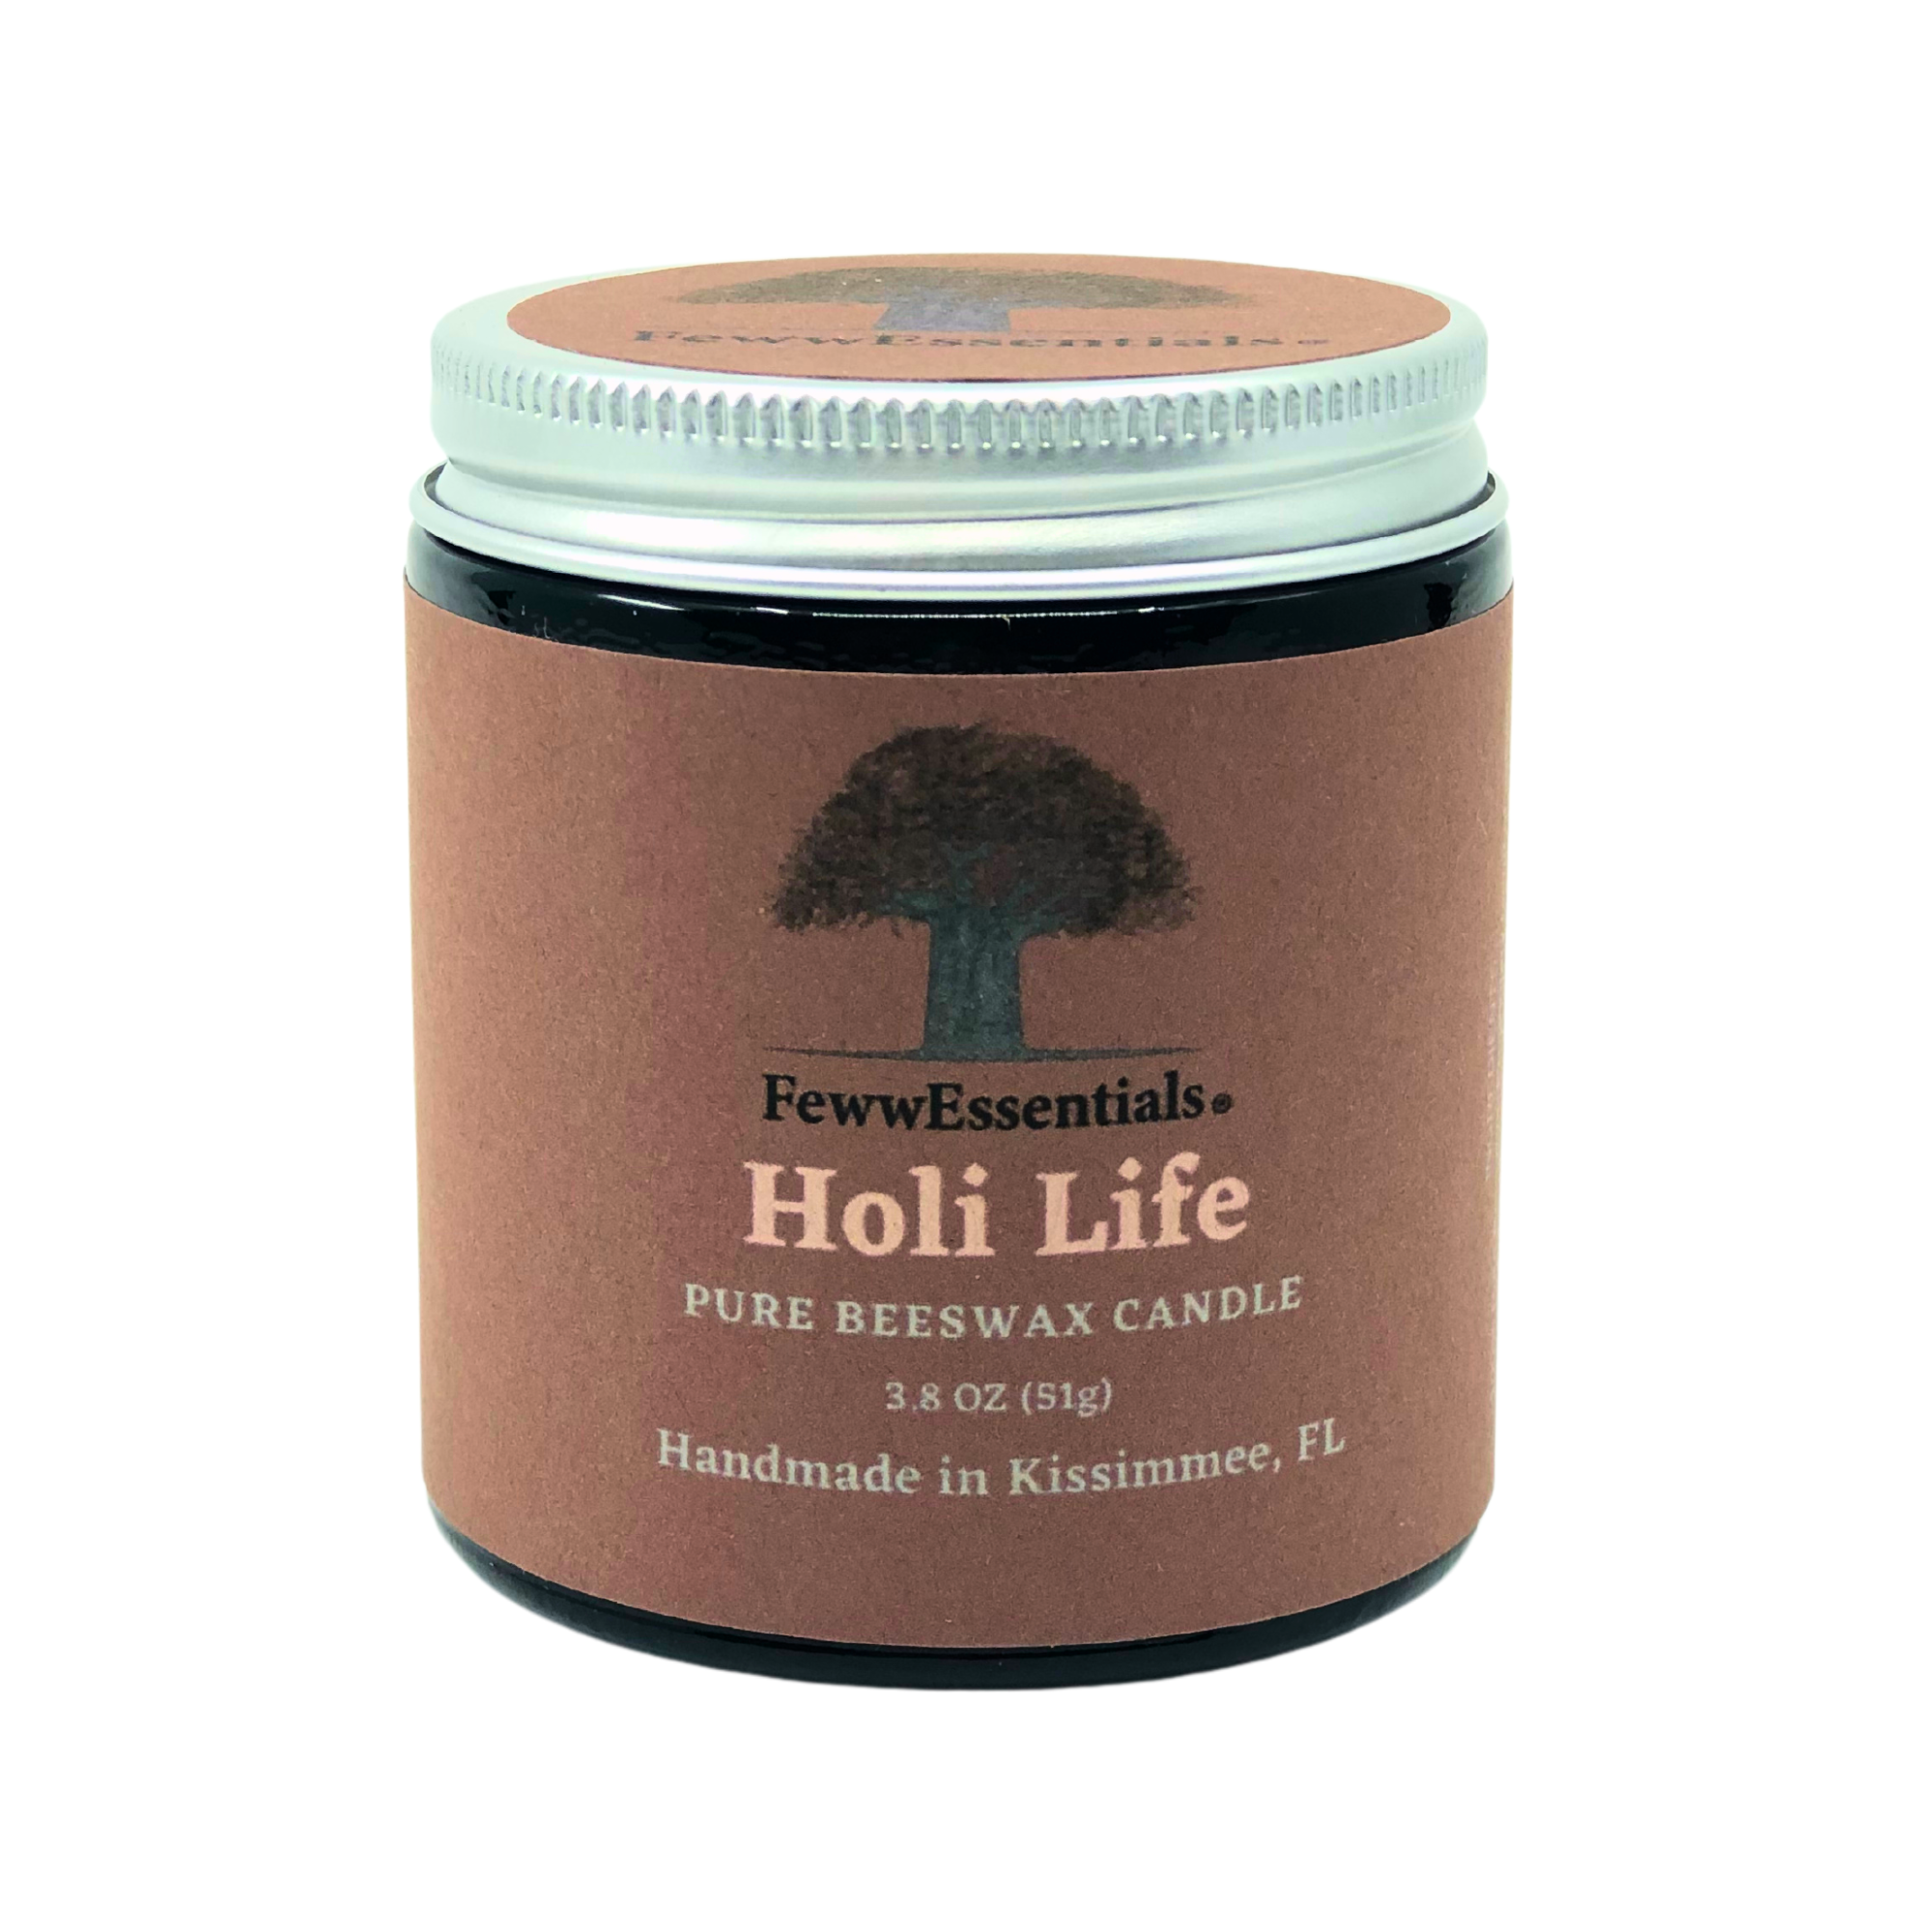 FewwEssentials® Holi Life Pure Beeswax Candle with Essential Oils